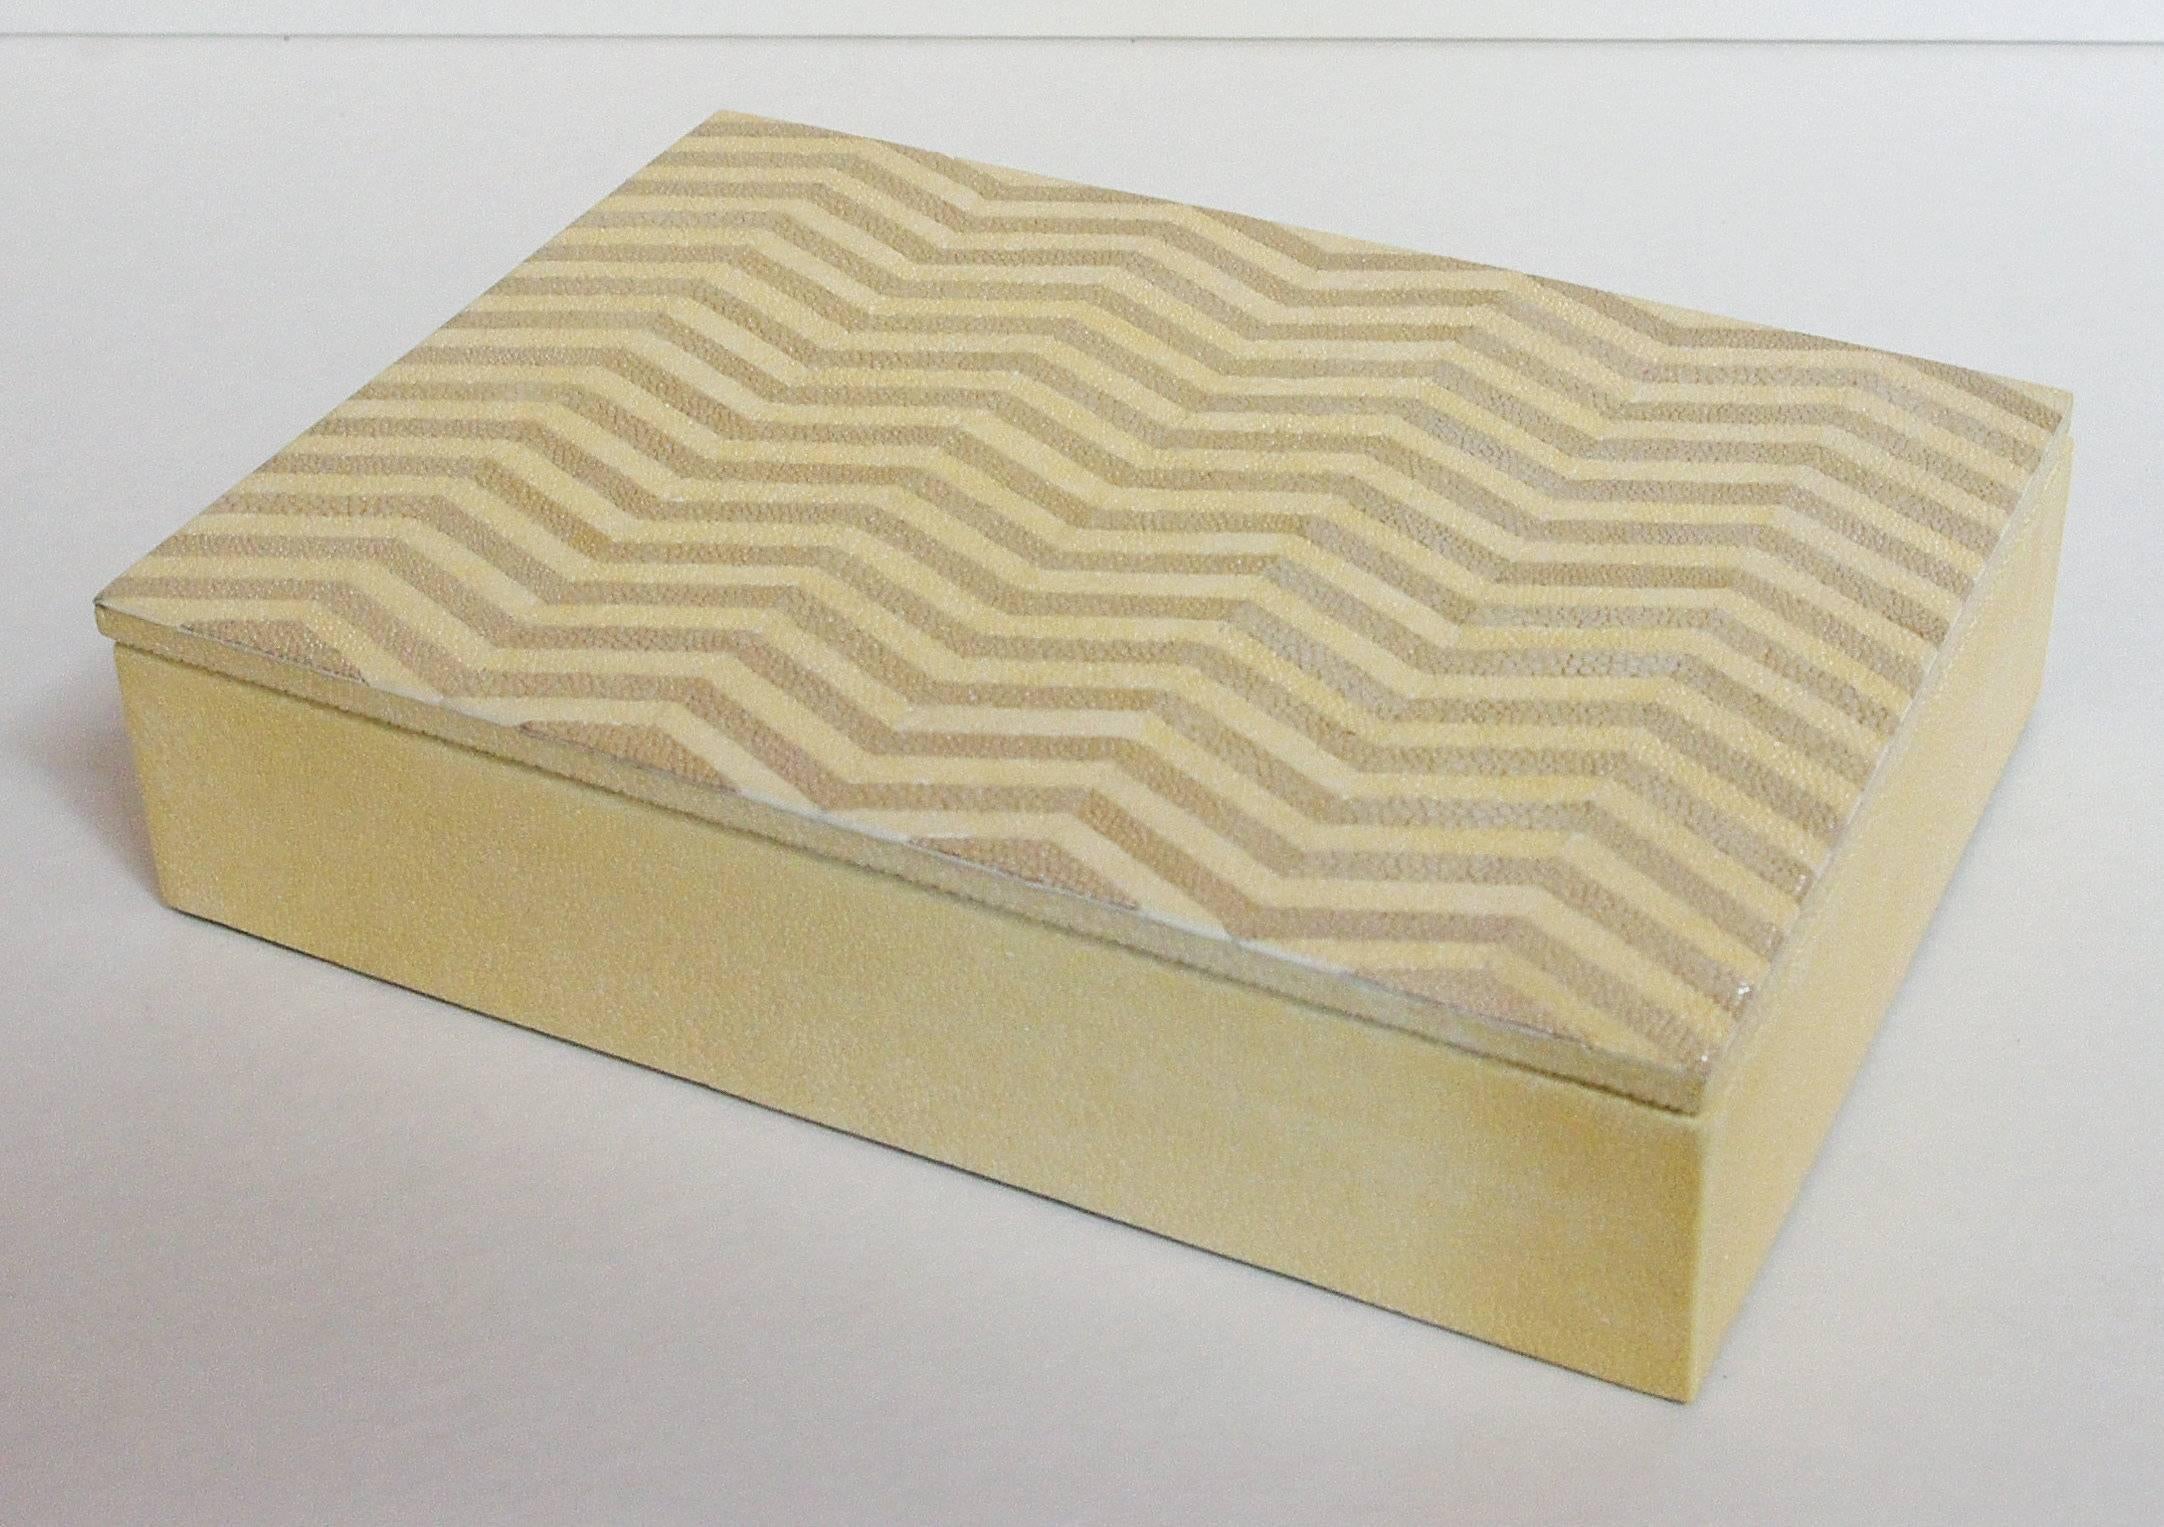 Ivory and brown Shagreen box with zigzag pattern and gray suede interior
Measures: Width 10 inches, depth 7 inches, height 2.5 inches
1 in stock in Palm Springs ON FINAL CLEARANCE SALE for $595 !!! 
Order Reference #: FABIOLTD MR20
This piece makes